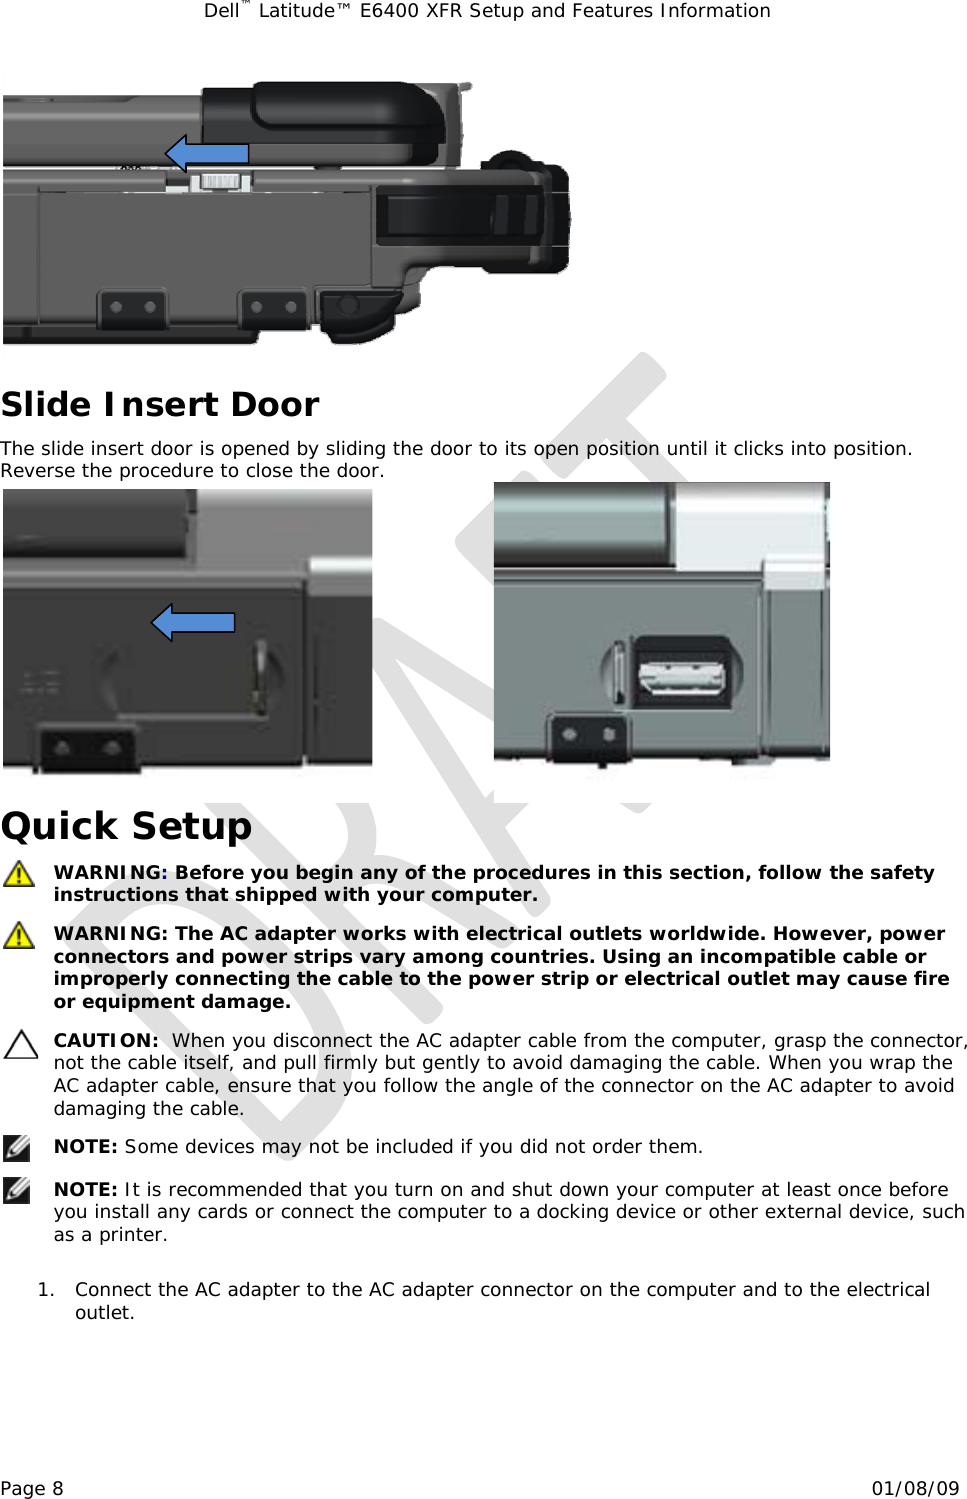 Dell™ Latitude™ E6400 XFR Setup and Features Information   Page 8                                                                                                01/08/09  Slide Insert Door The slide insert door is opened by sliding the door to its open position until it clicks into position.  Reverse the procedure to close the door.                          Quick Setup  WARNING: Before you begin any of the procedures in this section, follow the safety instructions that shipped with your computer.  WARNING: The AC adapter works with electrical outlets worldwide. However, power connectors and power strips vary among countries. Using an incompatible cable or improperly connecting the cable to the power strip or electrical outlet may cause fire or equipment damage.  CAUTION:  When you disconnect the AC adapter cable from the computer, grasp the connector, not the cable itself, and pull firmly but gently to avoid damaging the cable. When you wrap the AC adapter cable, ensure that you follow the angle of the connector on the AC adapter to avoid damaging the cable.  NOTE: Some devices may not be included if you did not order them.  NOTE: It is recommended that you turn on and shut down your computer at least once before you install any cards or connect the computer to a docking device or other external device, such as a printer.  1. Connect the AC adapter to the AC adapter connector on the computer and to the electrical outlet. 